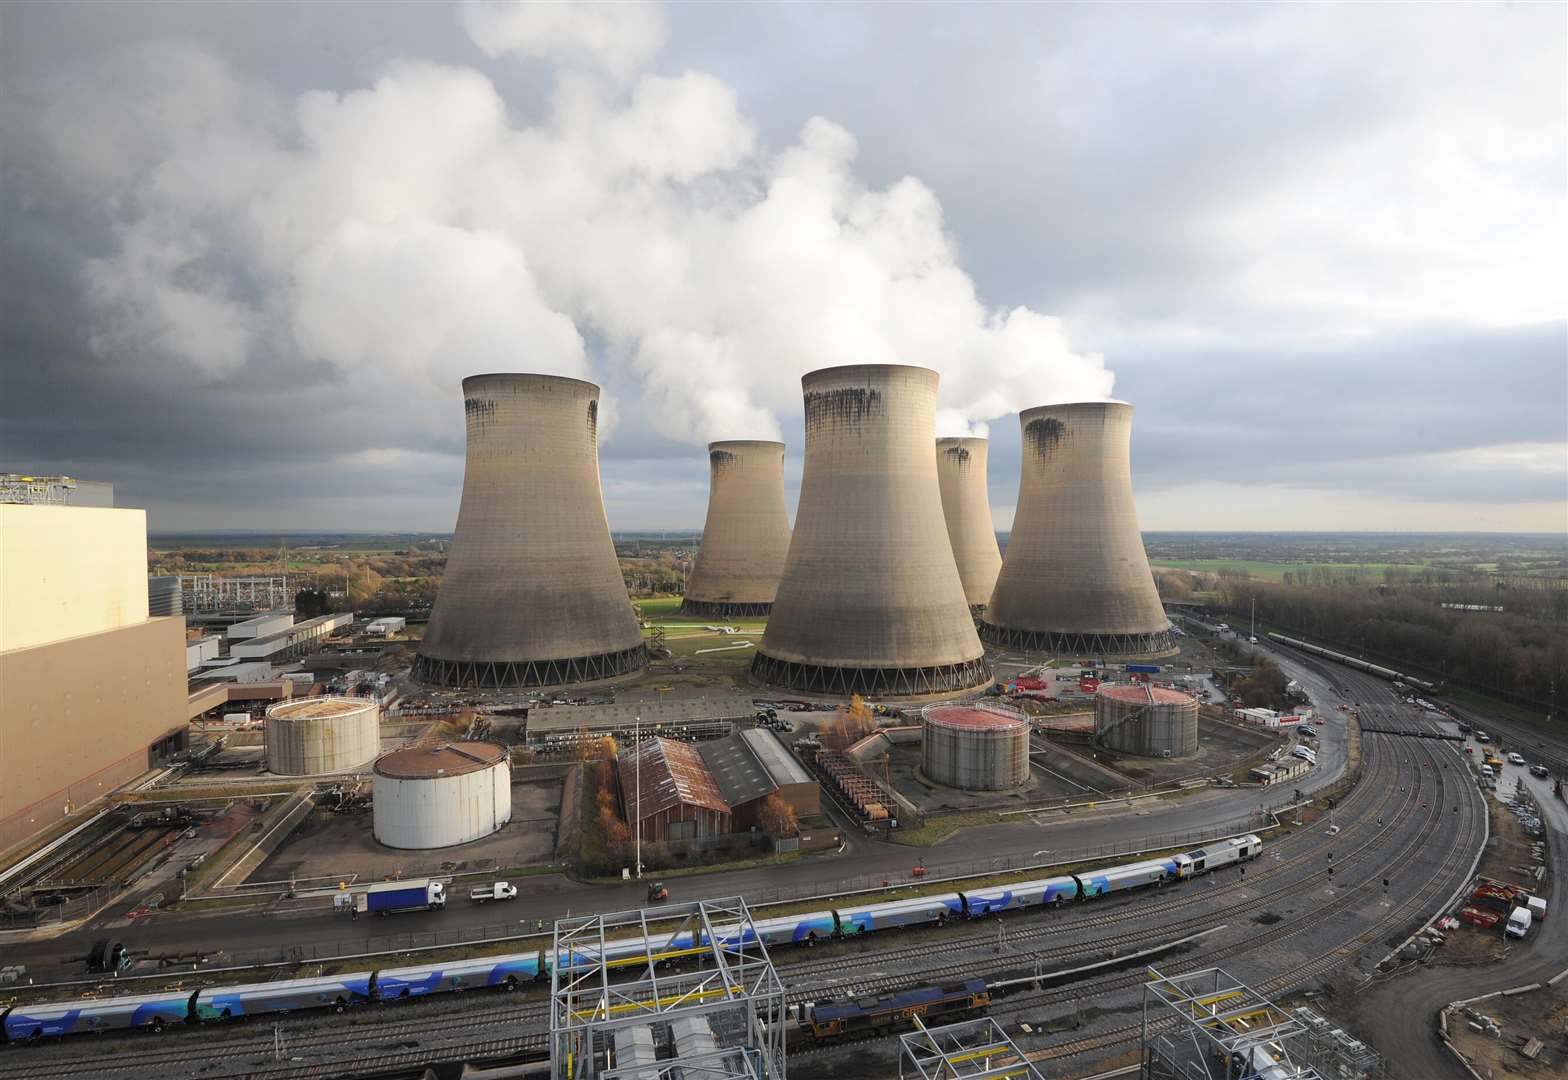 Biomass, such as that burnt at the Drax power station in North Yorkshire, must be genuinely sustainably sourced, the committee said (Anna Gowthorpe/PA)